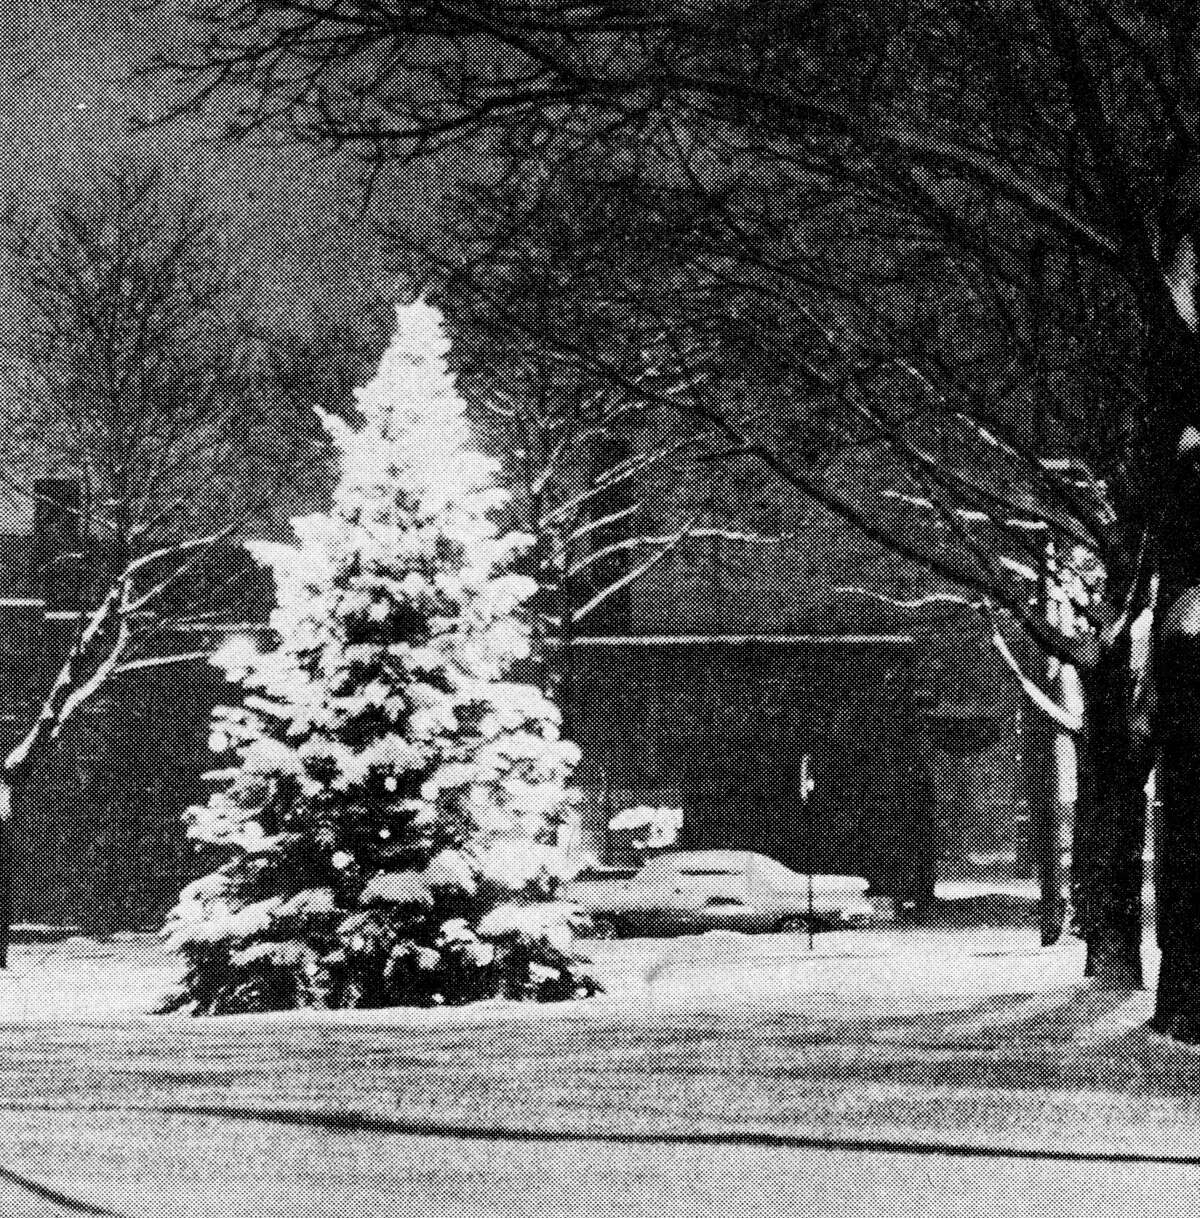 The Manistee High School spruce tree was cut down by vandals — but it proves to be one of the most beautiful community Christmas trees in many years as its many lights shine through the snow-covered branches. The community tree is located on the triangle at River and Water streets. The photo was published in the News Advocate on Dec. 11, 1962.